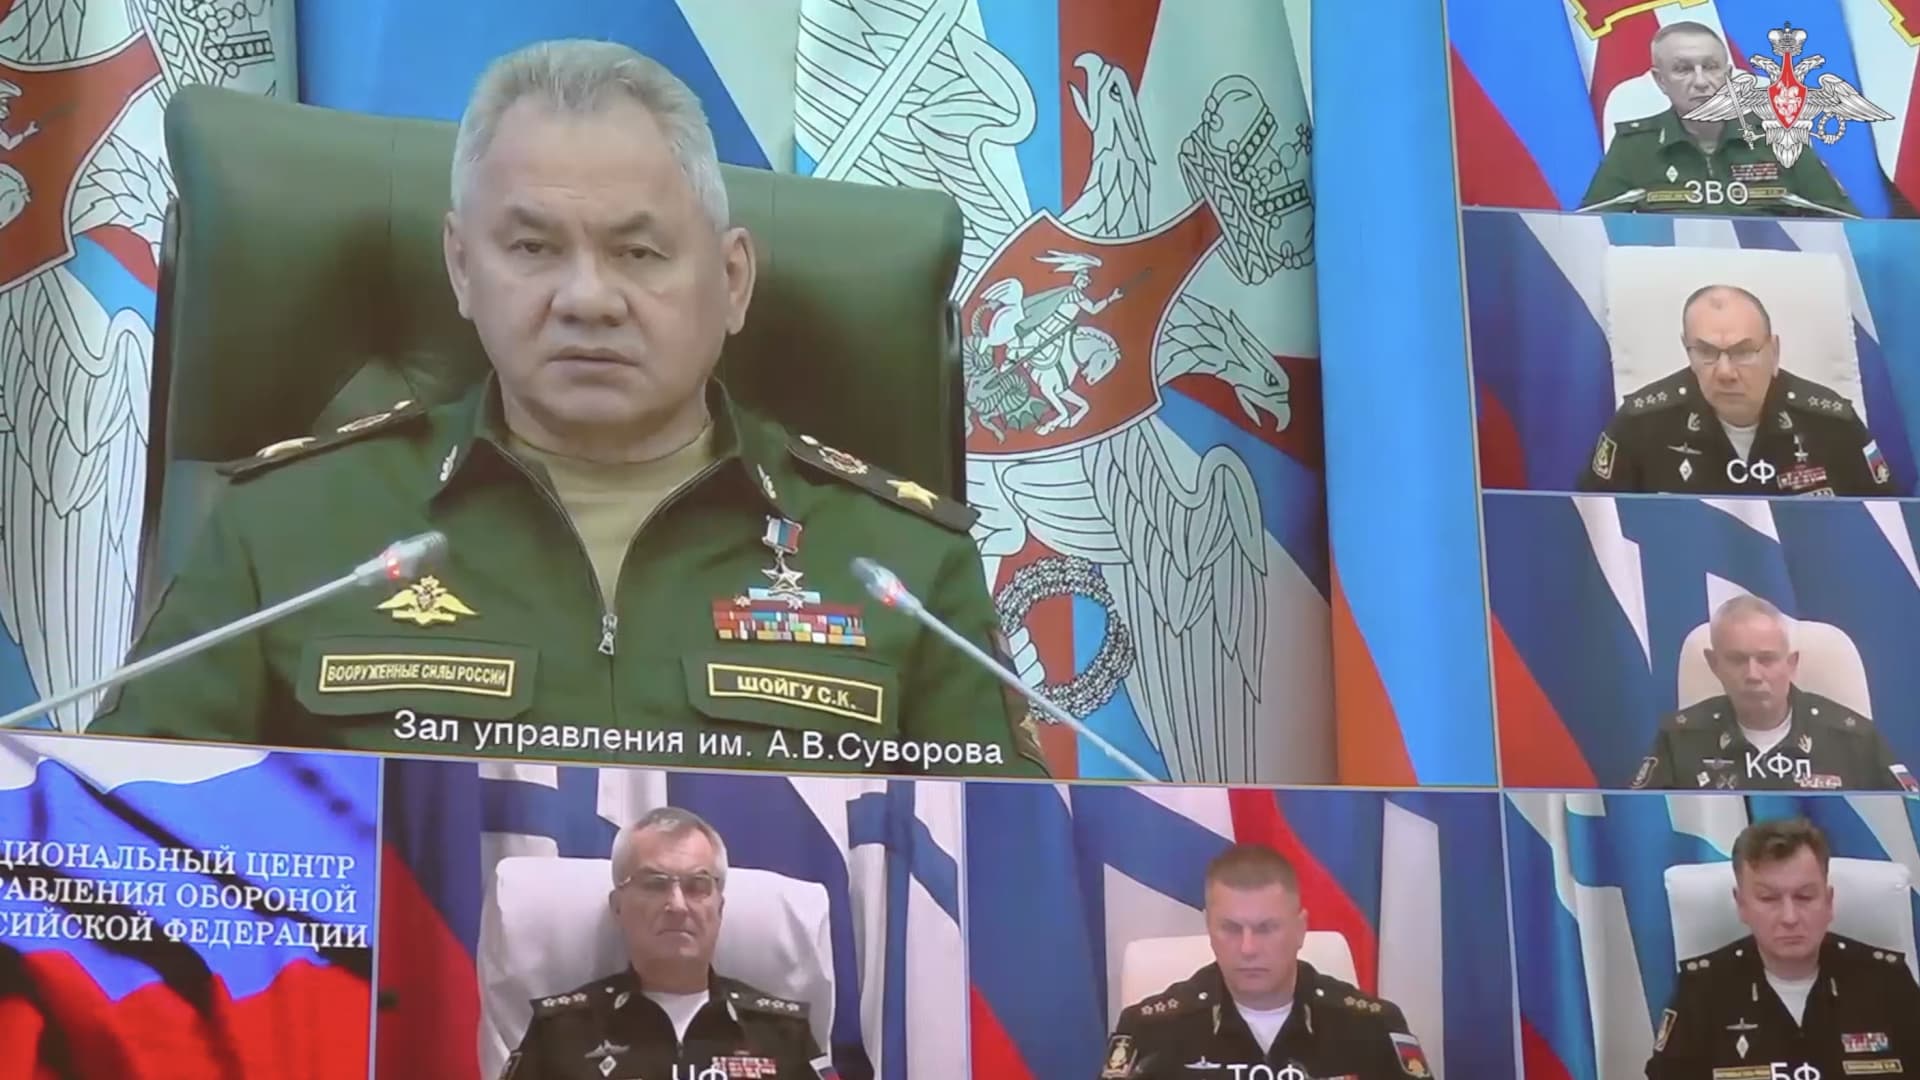 Commander of the Russian Black Sea Fleet Viktor Sokolov (Bottom L), who has been claimed to be killed in the September 22 strike on the Navy headquarters in the city of Sevastopol, appears on the screen at the meeting that Russian Defense Minister Sergei Shoigu holds with Ministry officials in Moscow, Russia on September 26, 2023.